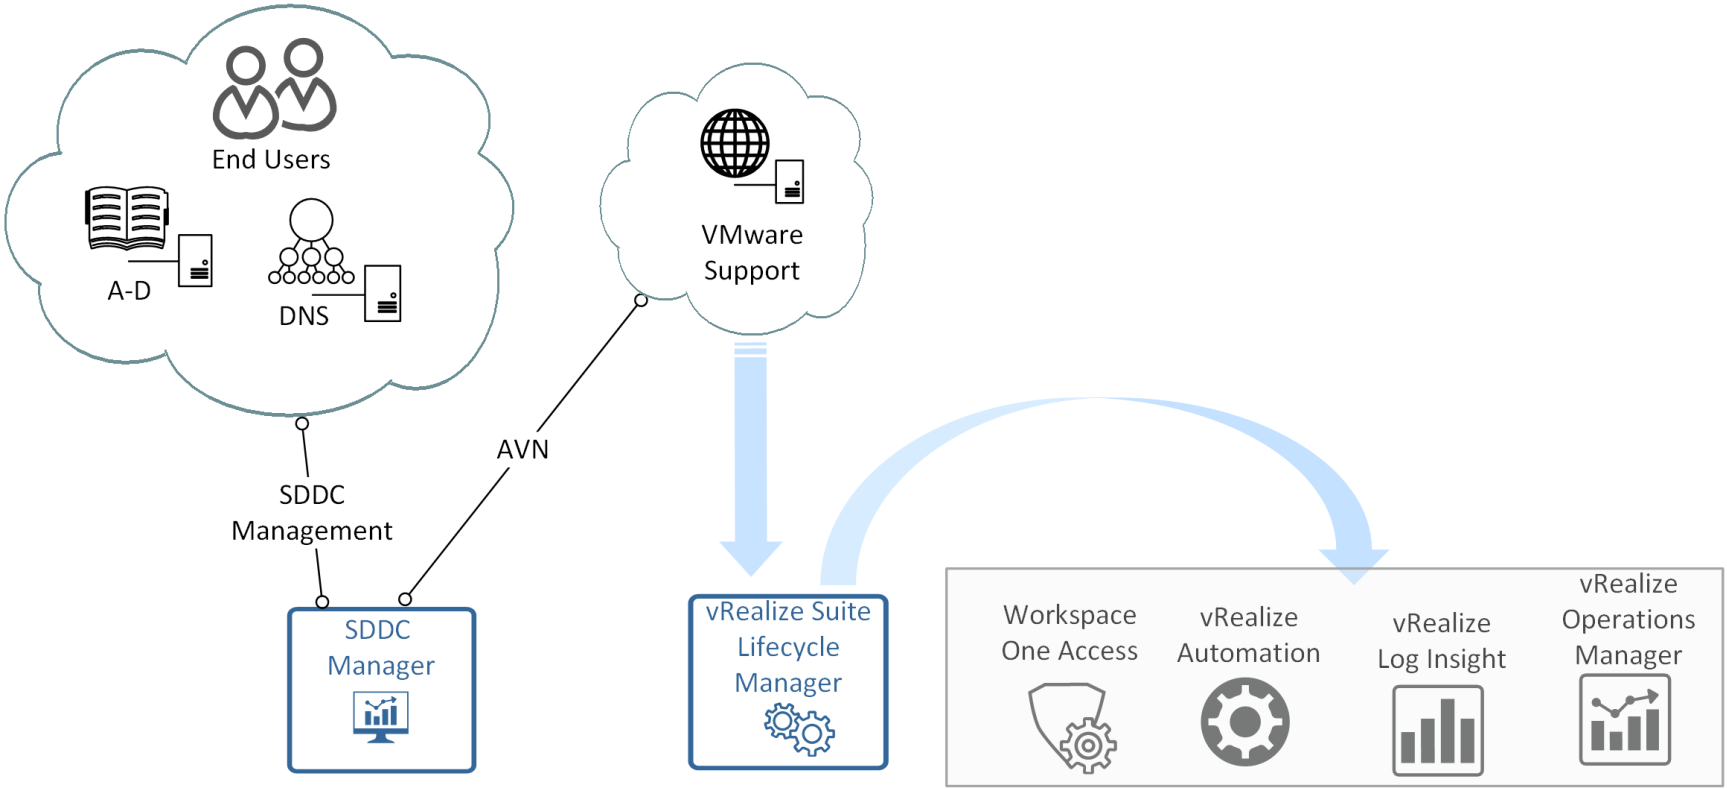 This figure shows how SDDC Manager uses AVN to download and deploy Aria Suite Lifecycle Manager.